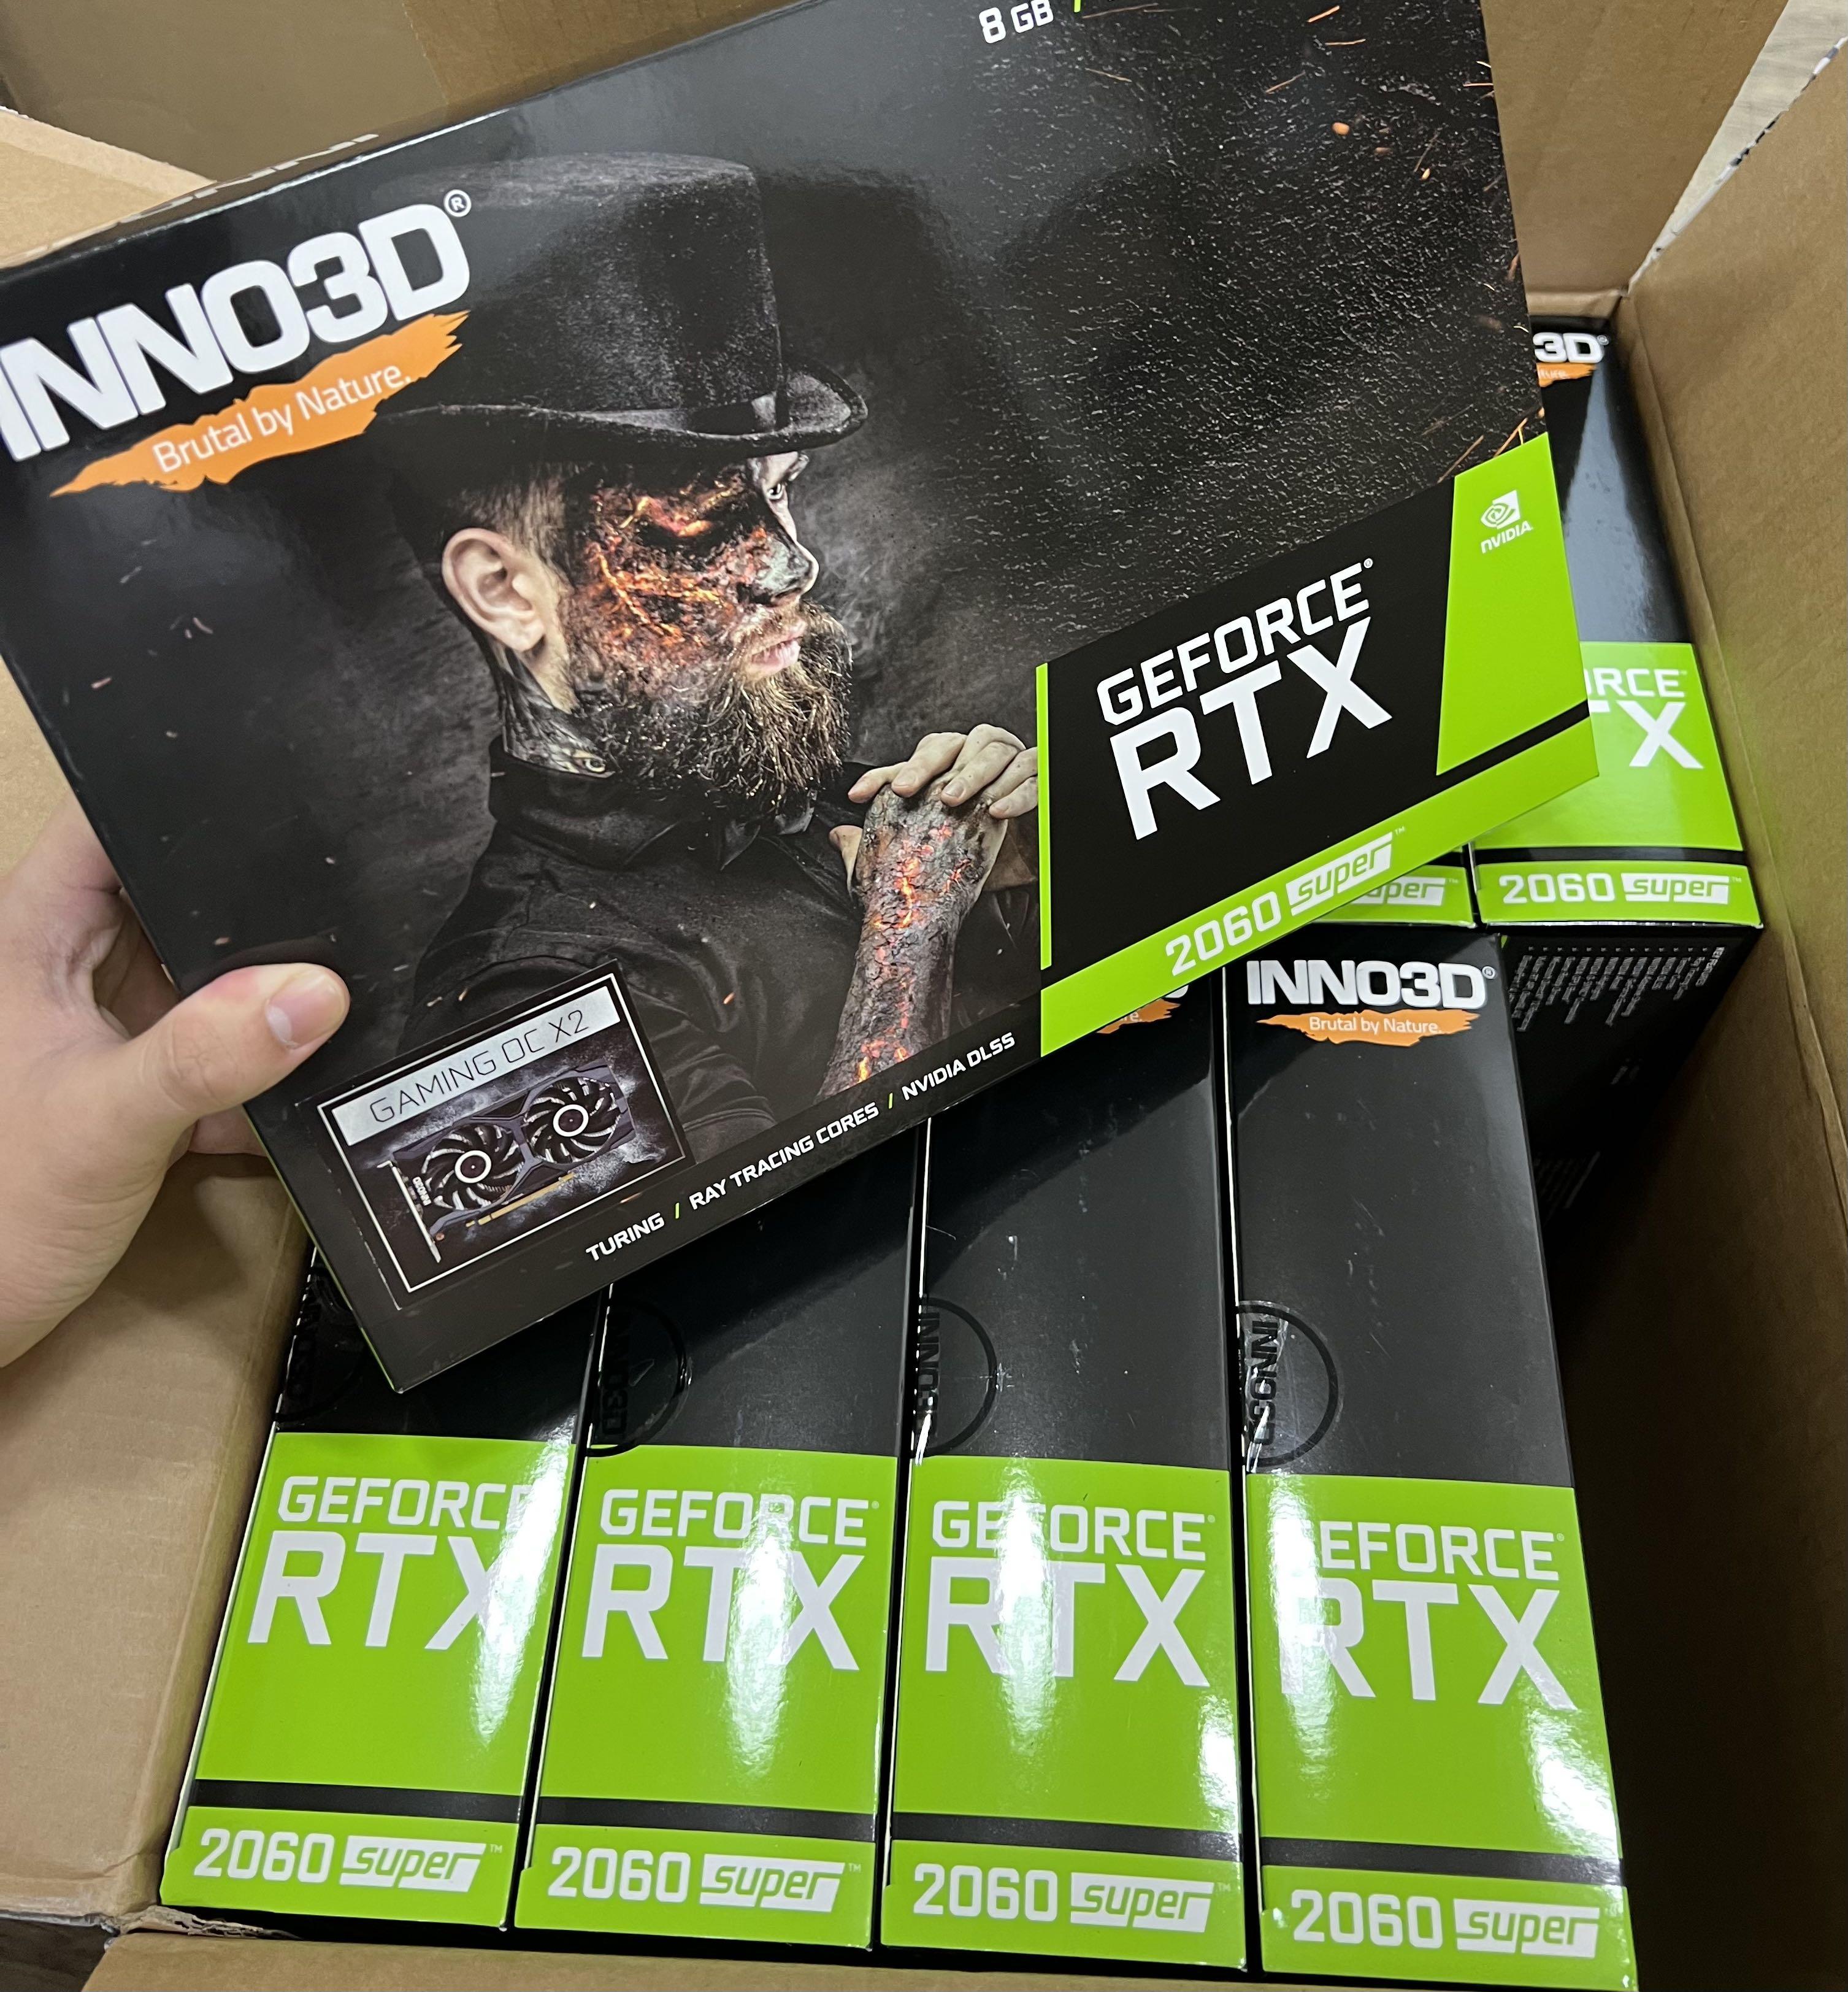 Better 3060) RTX 2060 SUPER INNO3D TWIN X2 OC RTX 2060S 8GB GDDR6, Computers & Tech, Parts & Accessories, Computer Parts on Carousell